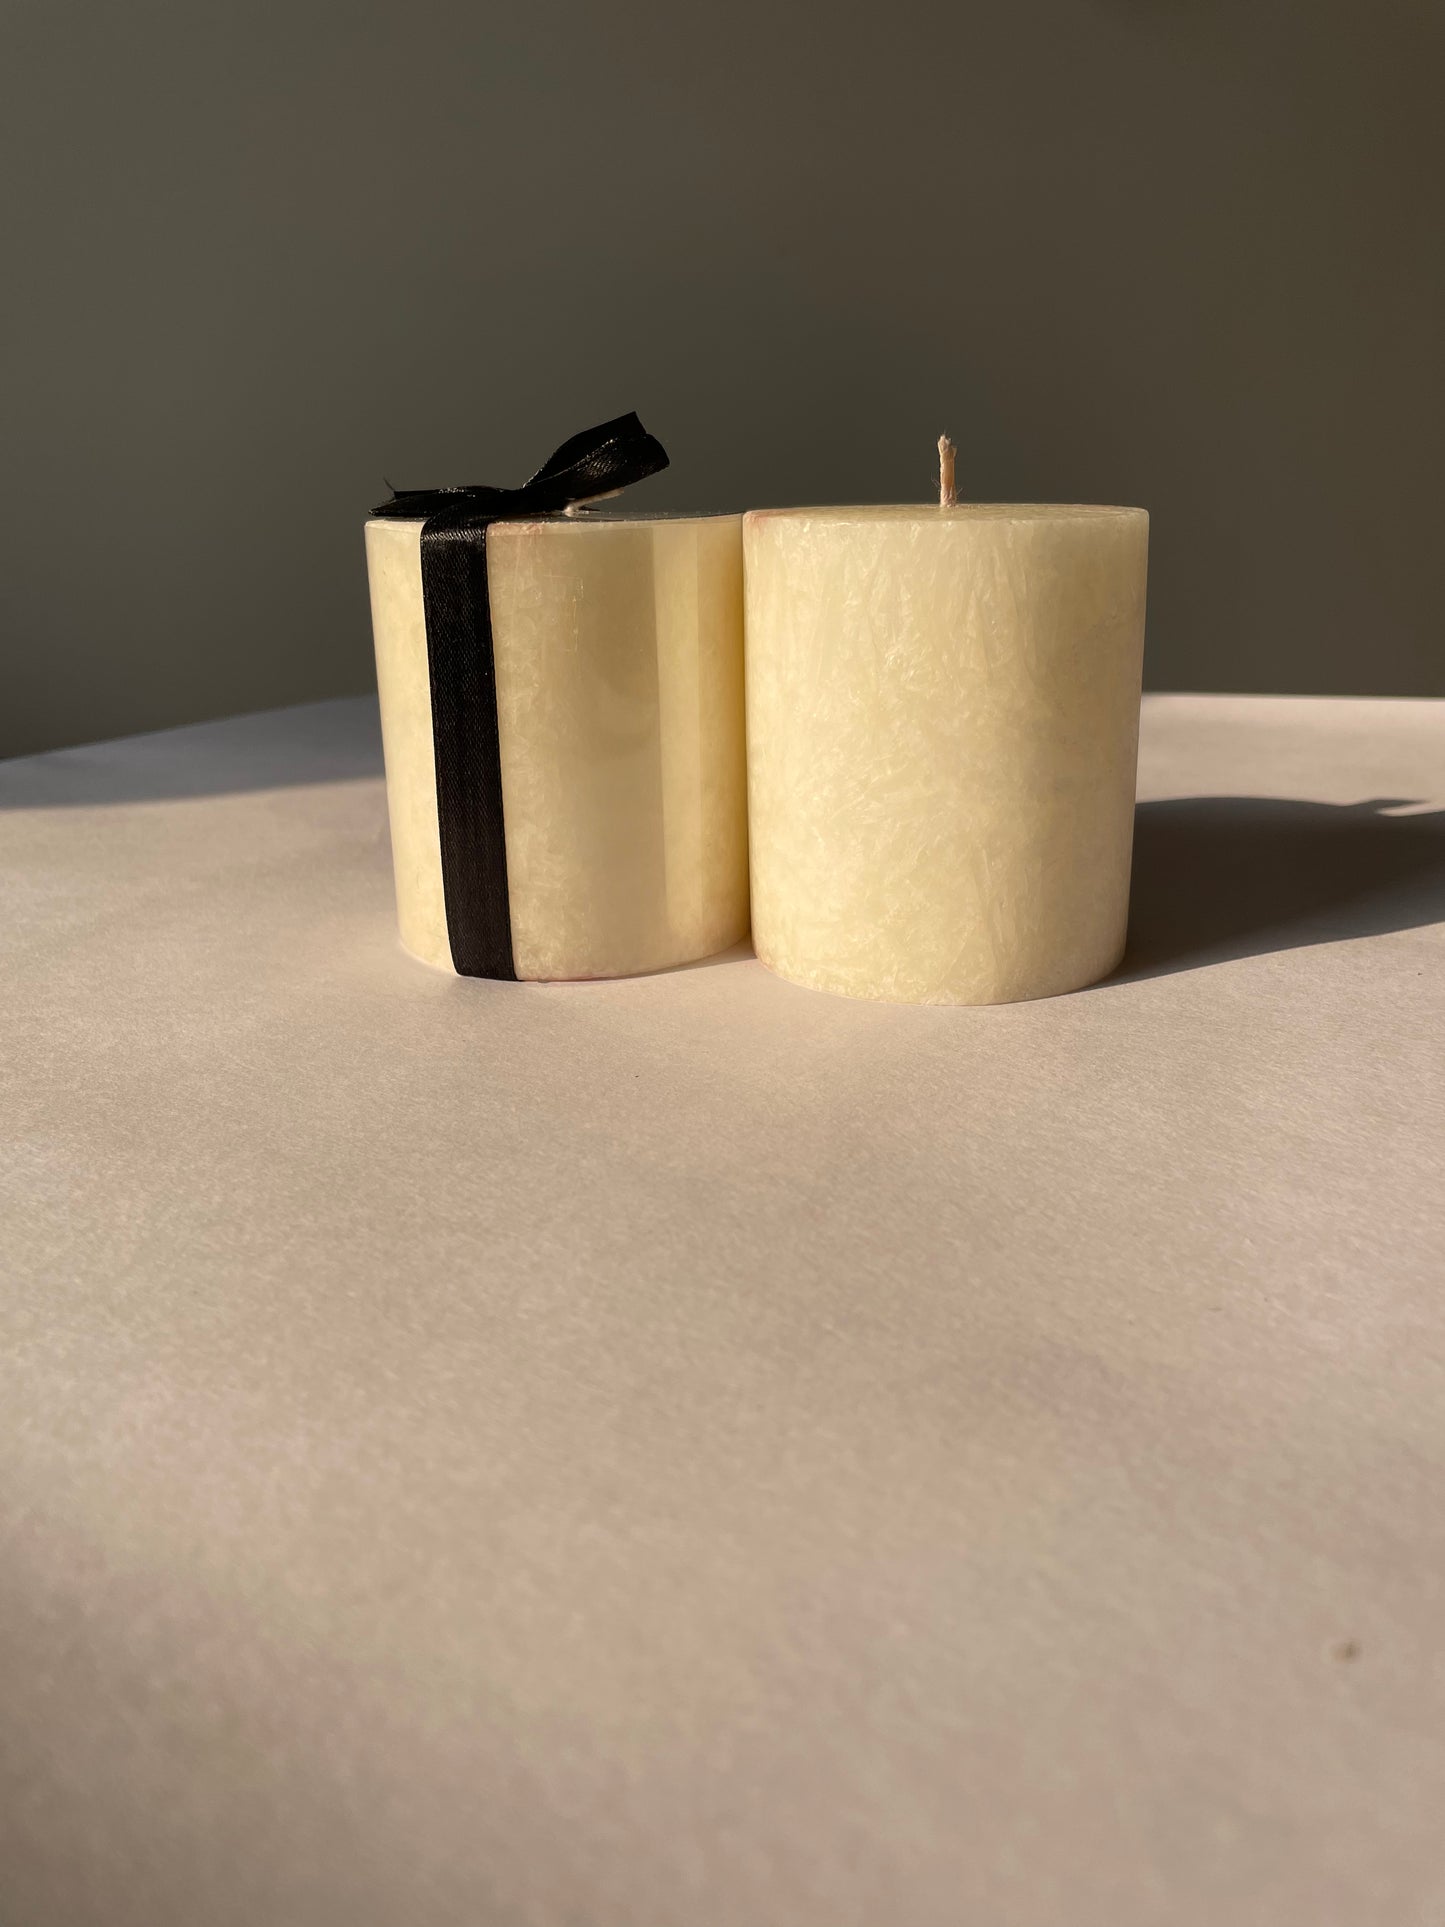 Set of Two Premium White Candles with Vanilla Scent - Romantic Gift